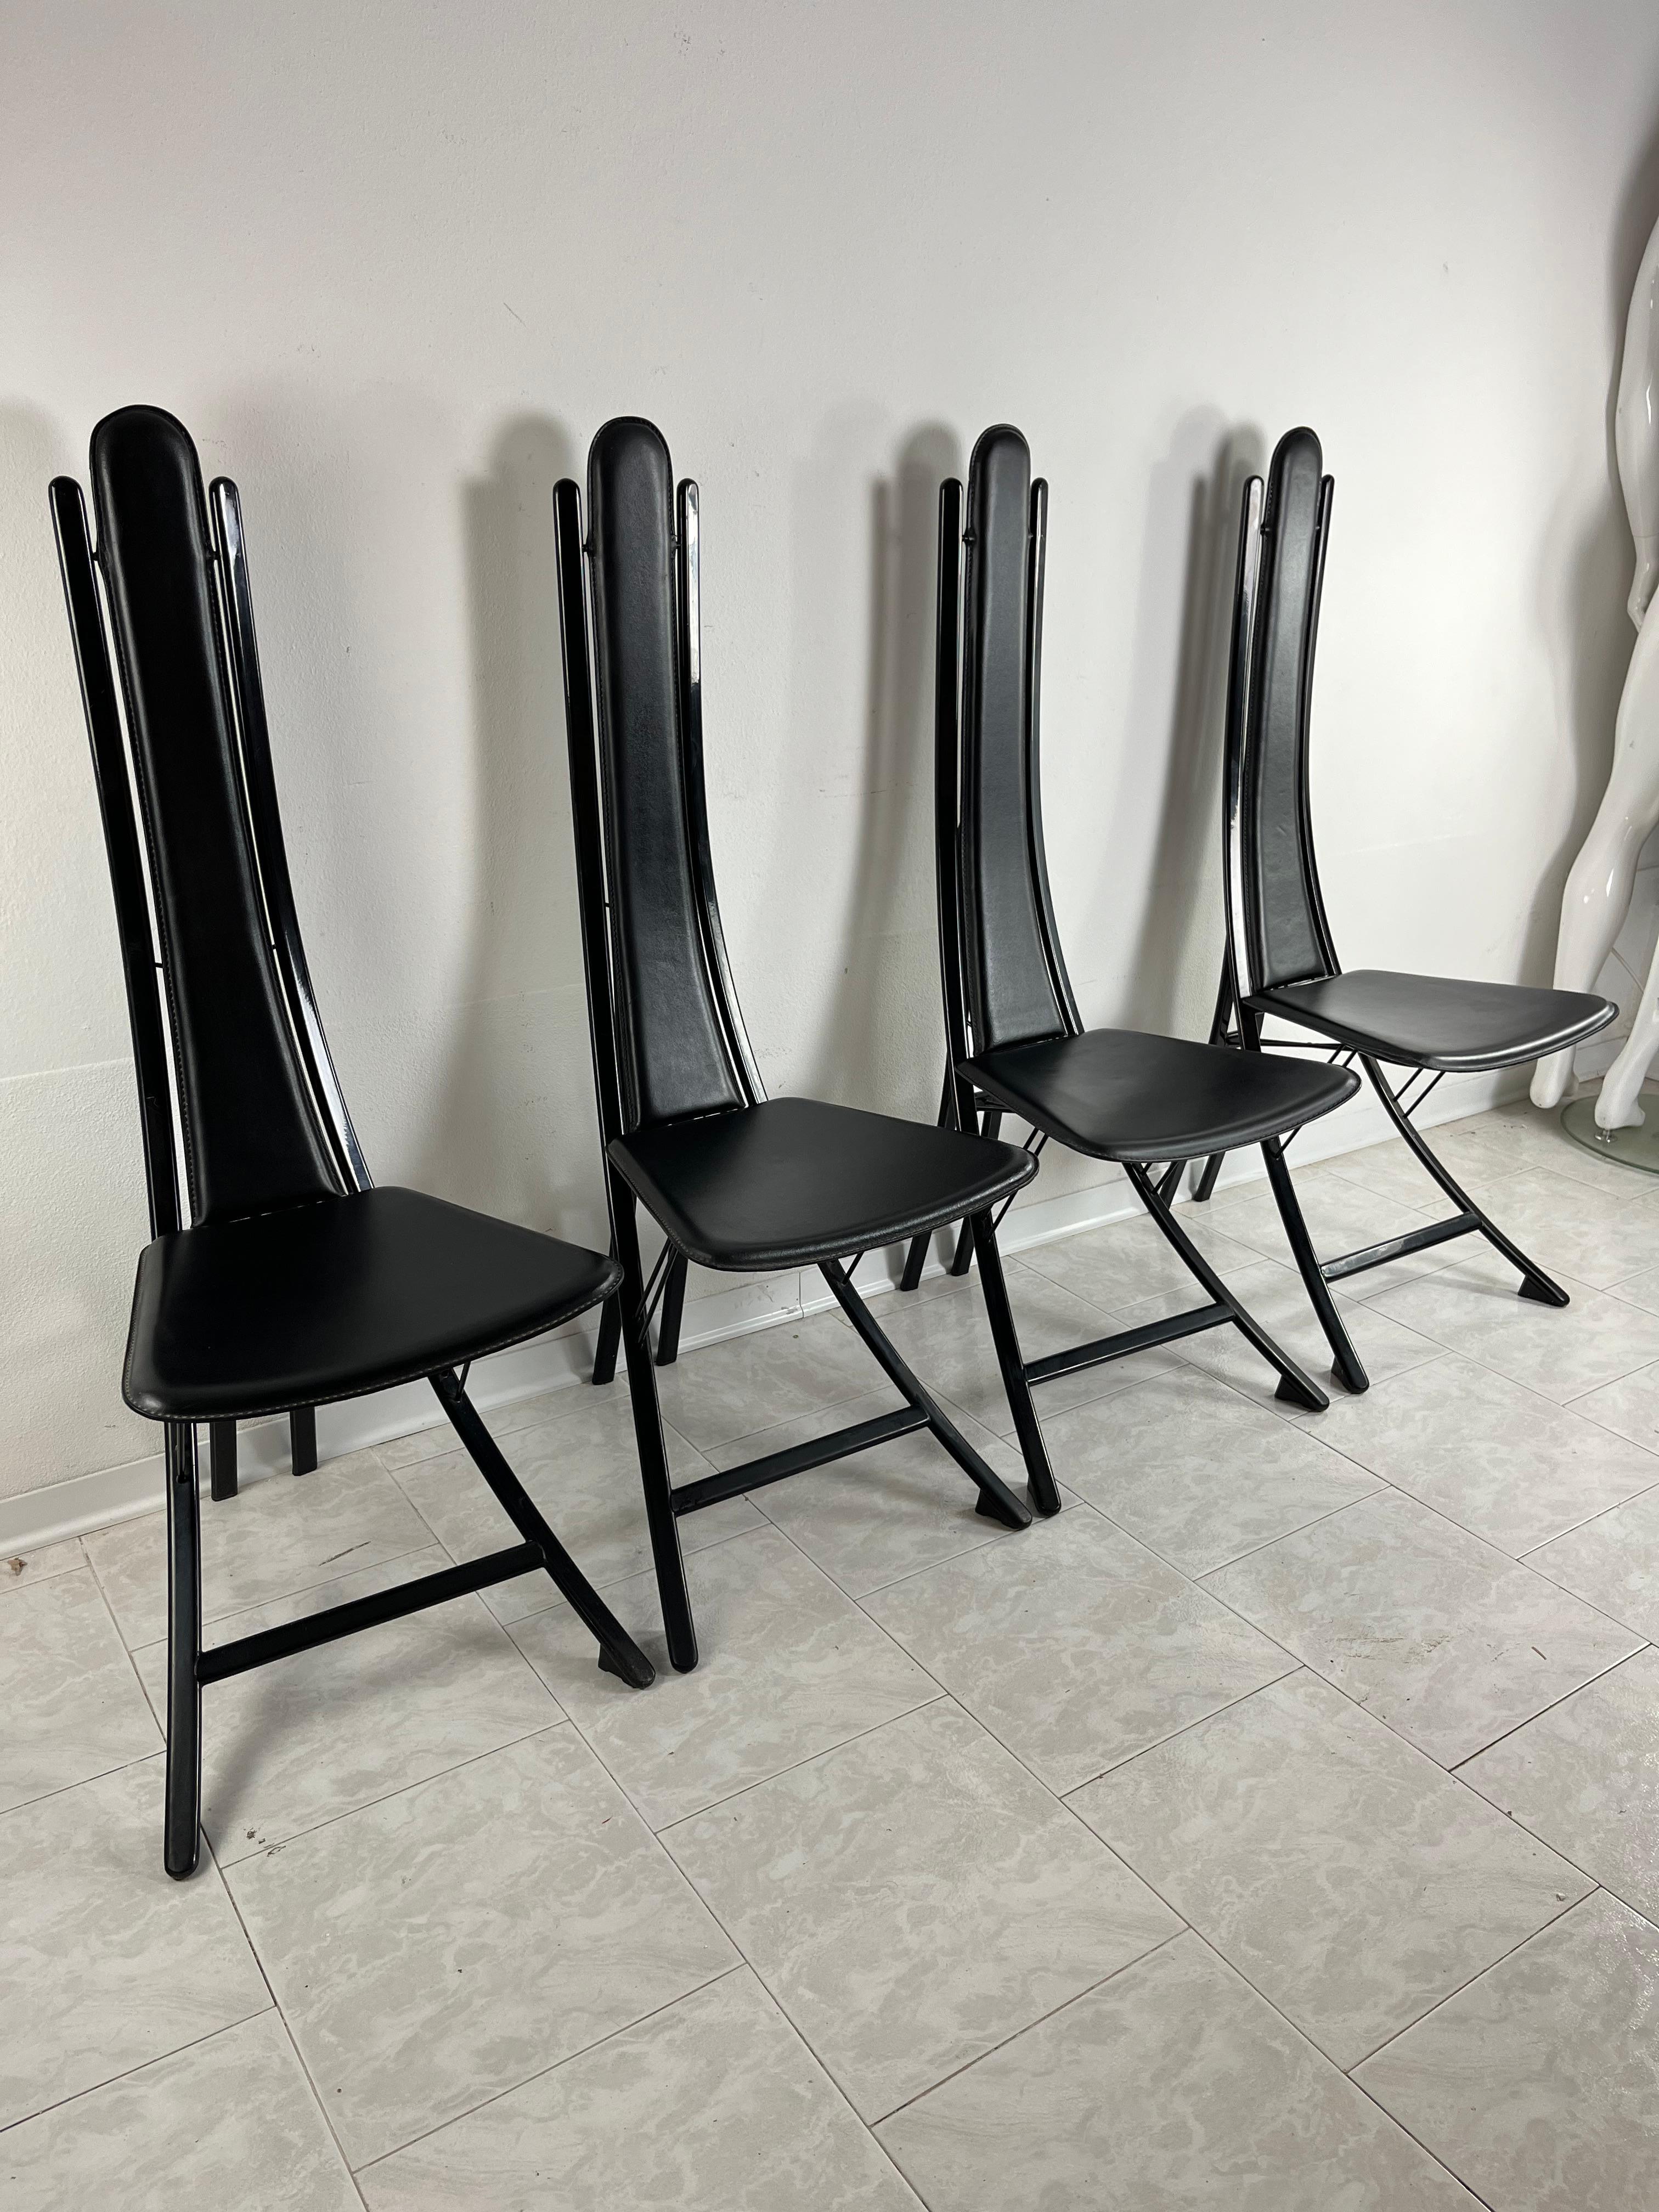 Vintage Set Of 4 Steel And Leather Chairs Attributed To Recanatini 1980s For Sale 2